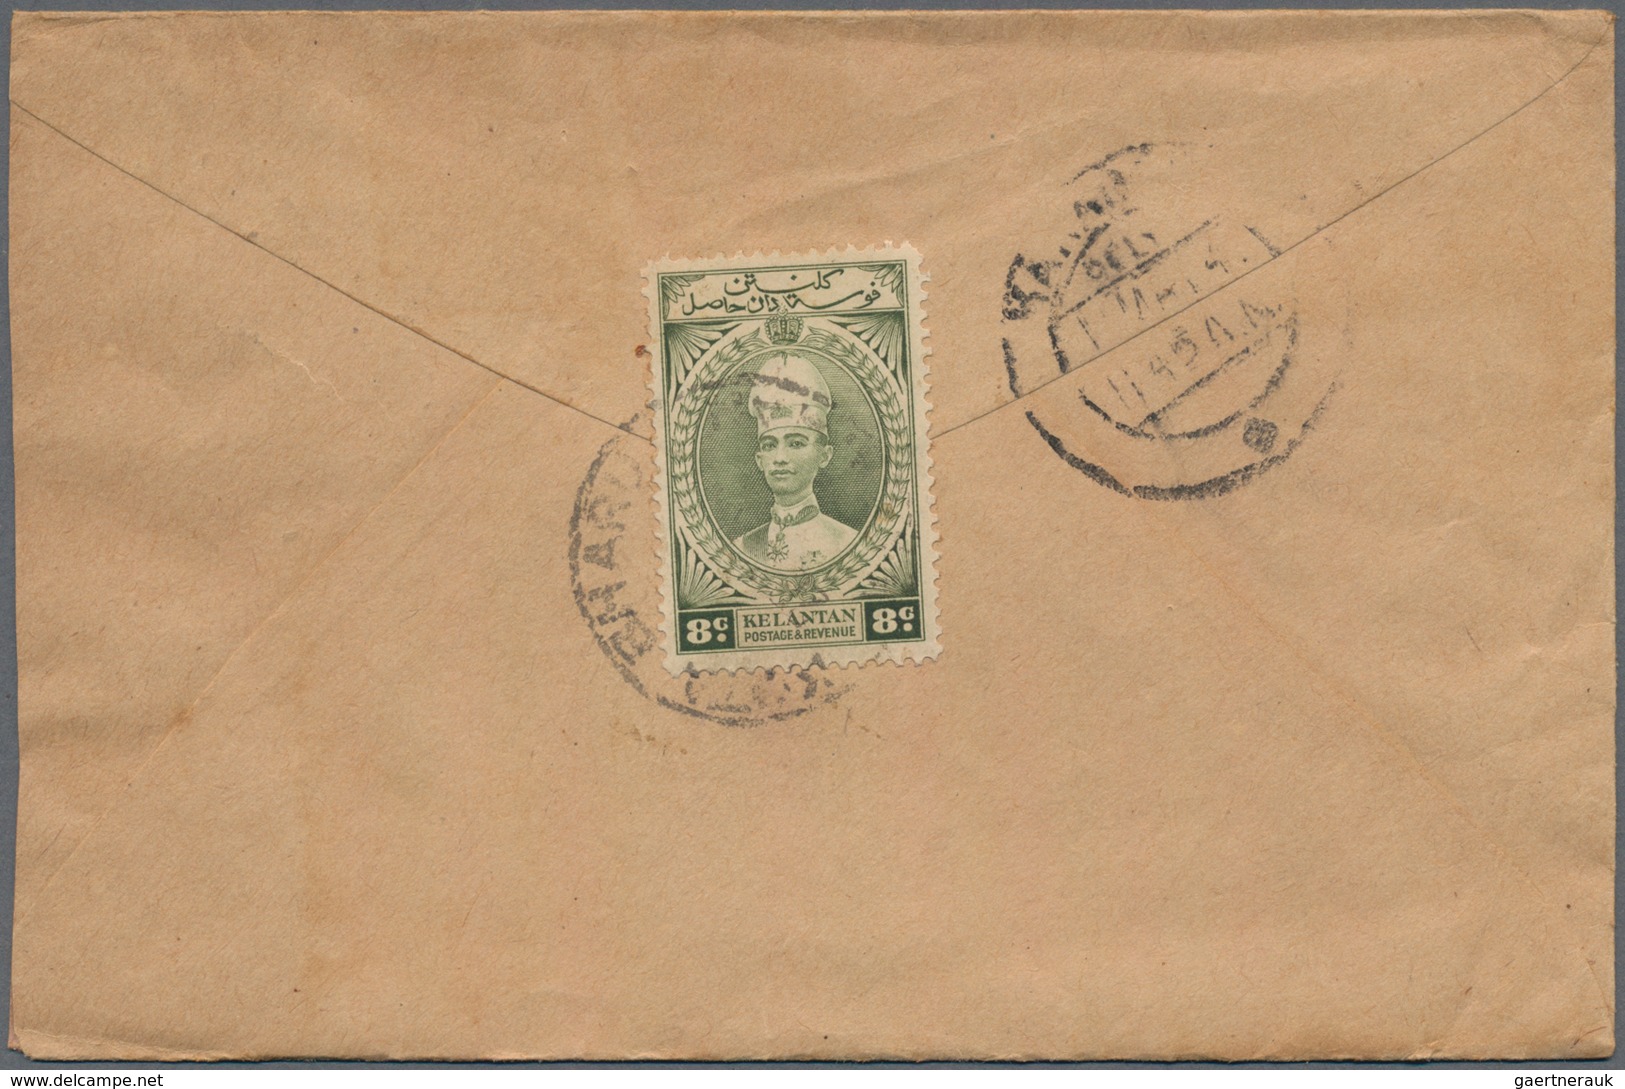 Malaiische Staaten - Kelantan: 1920's-70's: Approx. 500 Covers From Many Different Post Offices In K - Kelantan